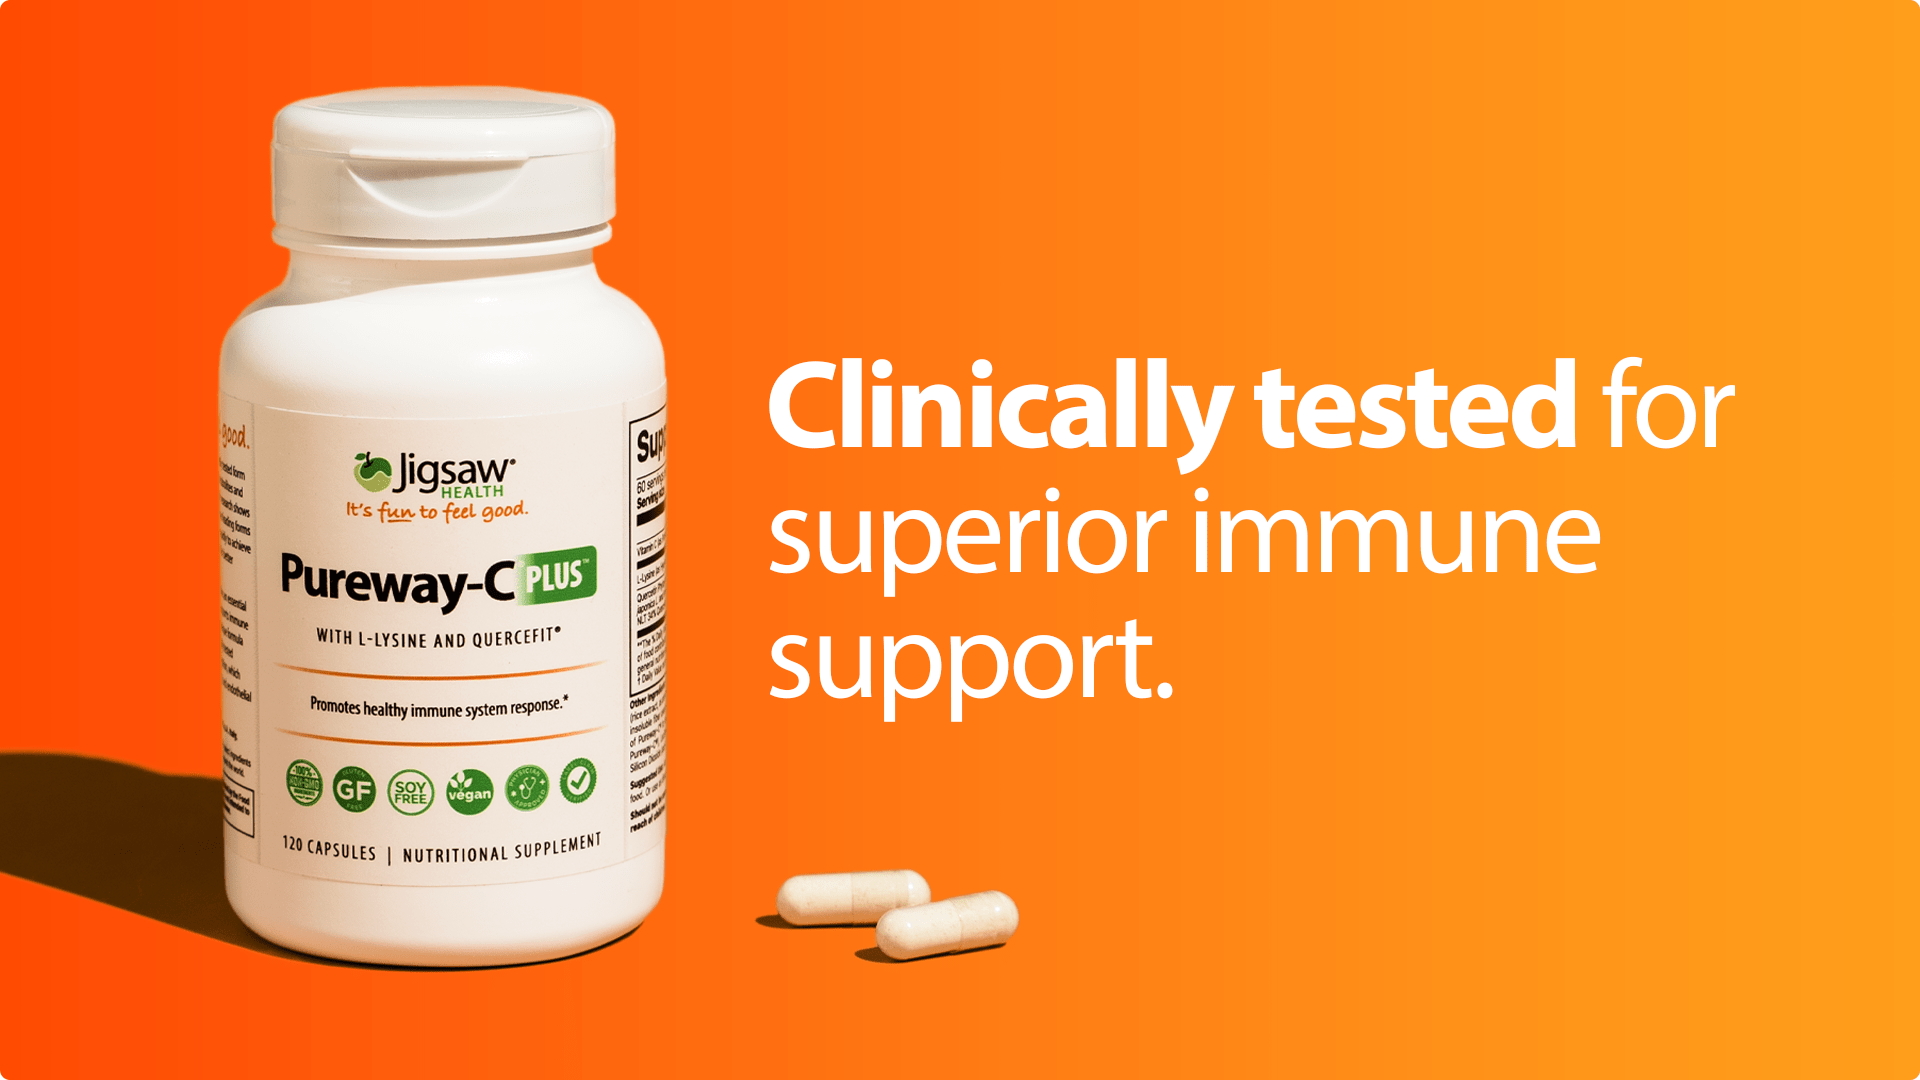 Jigsaw Pureway-C Plus: Clinically tested for Superior Immune Support